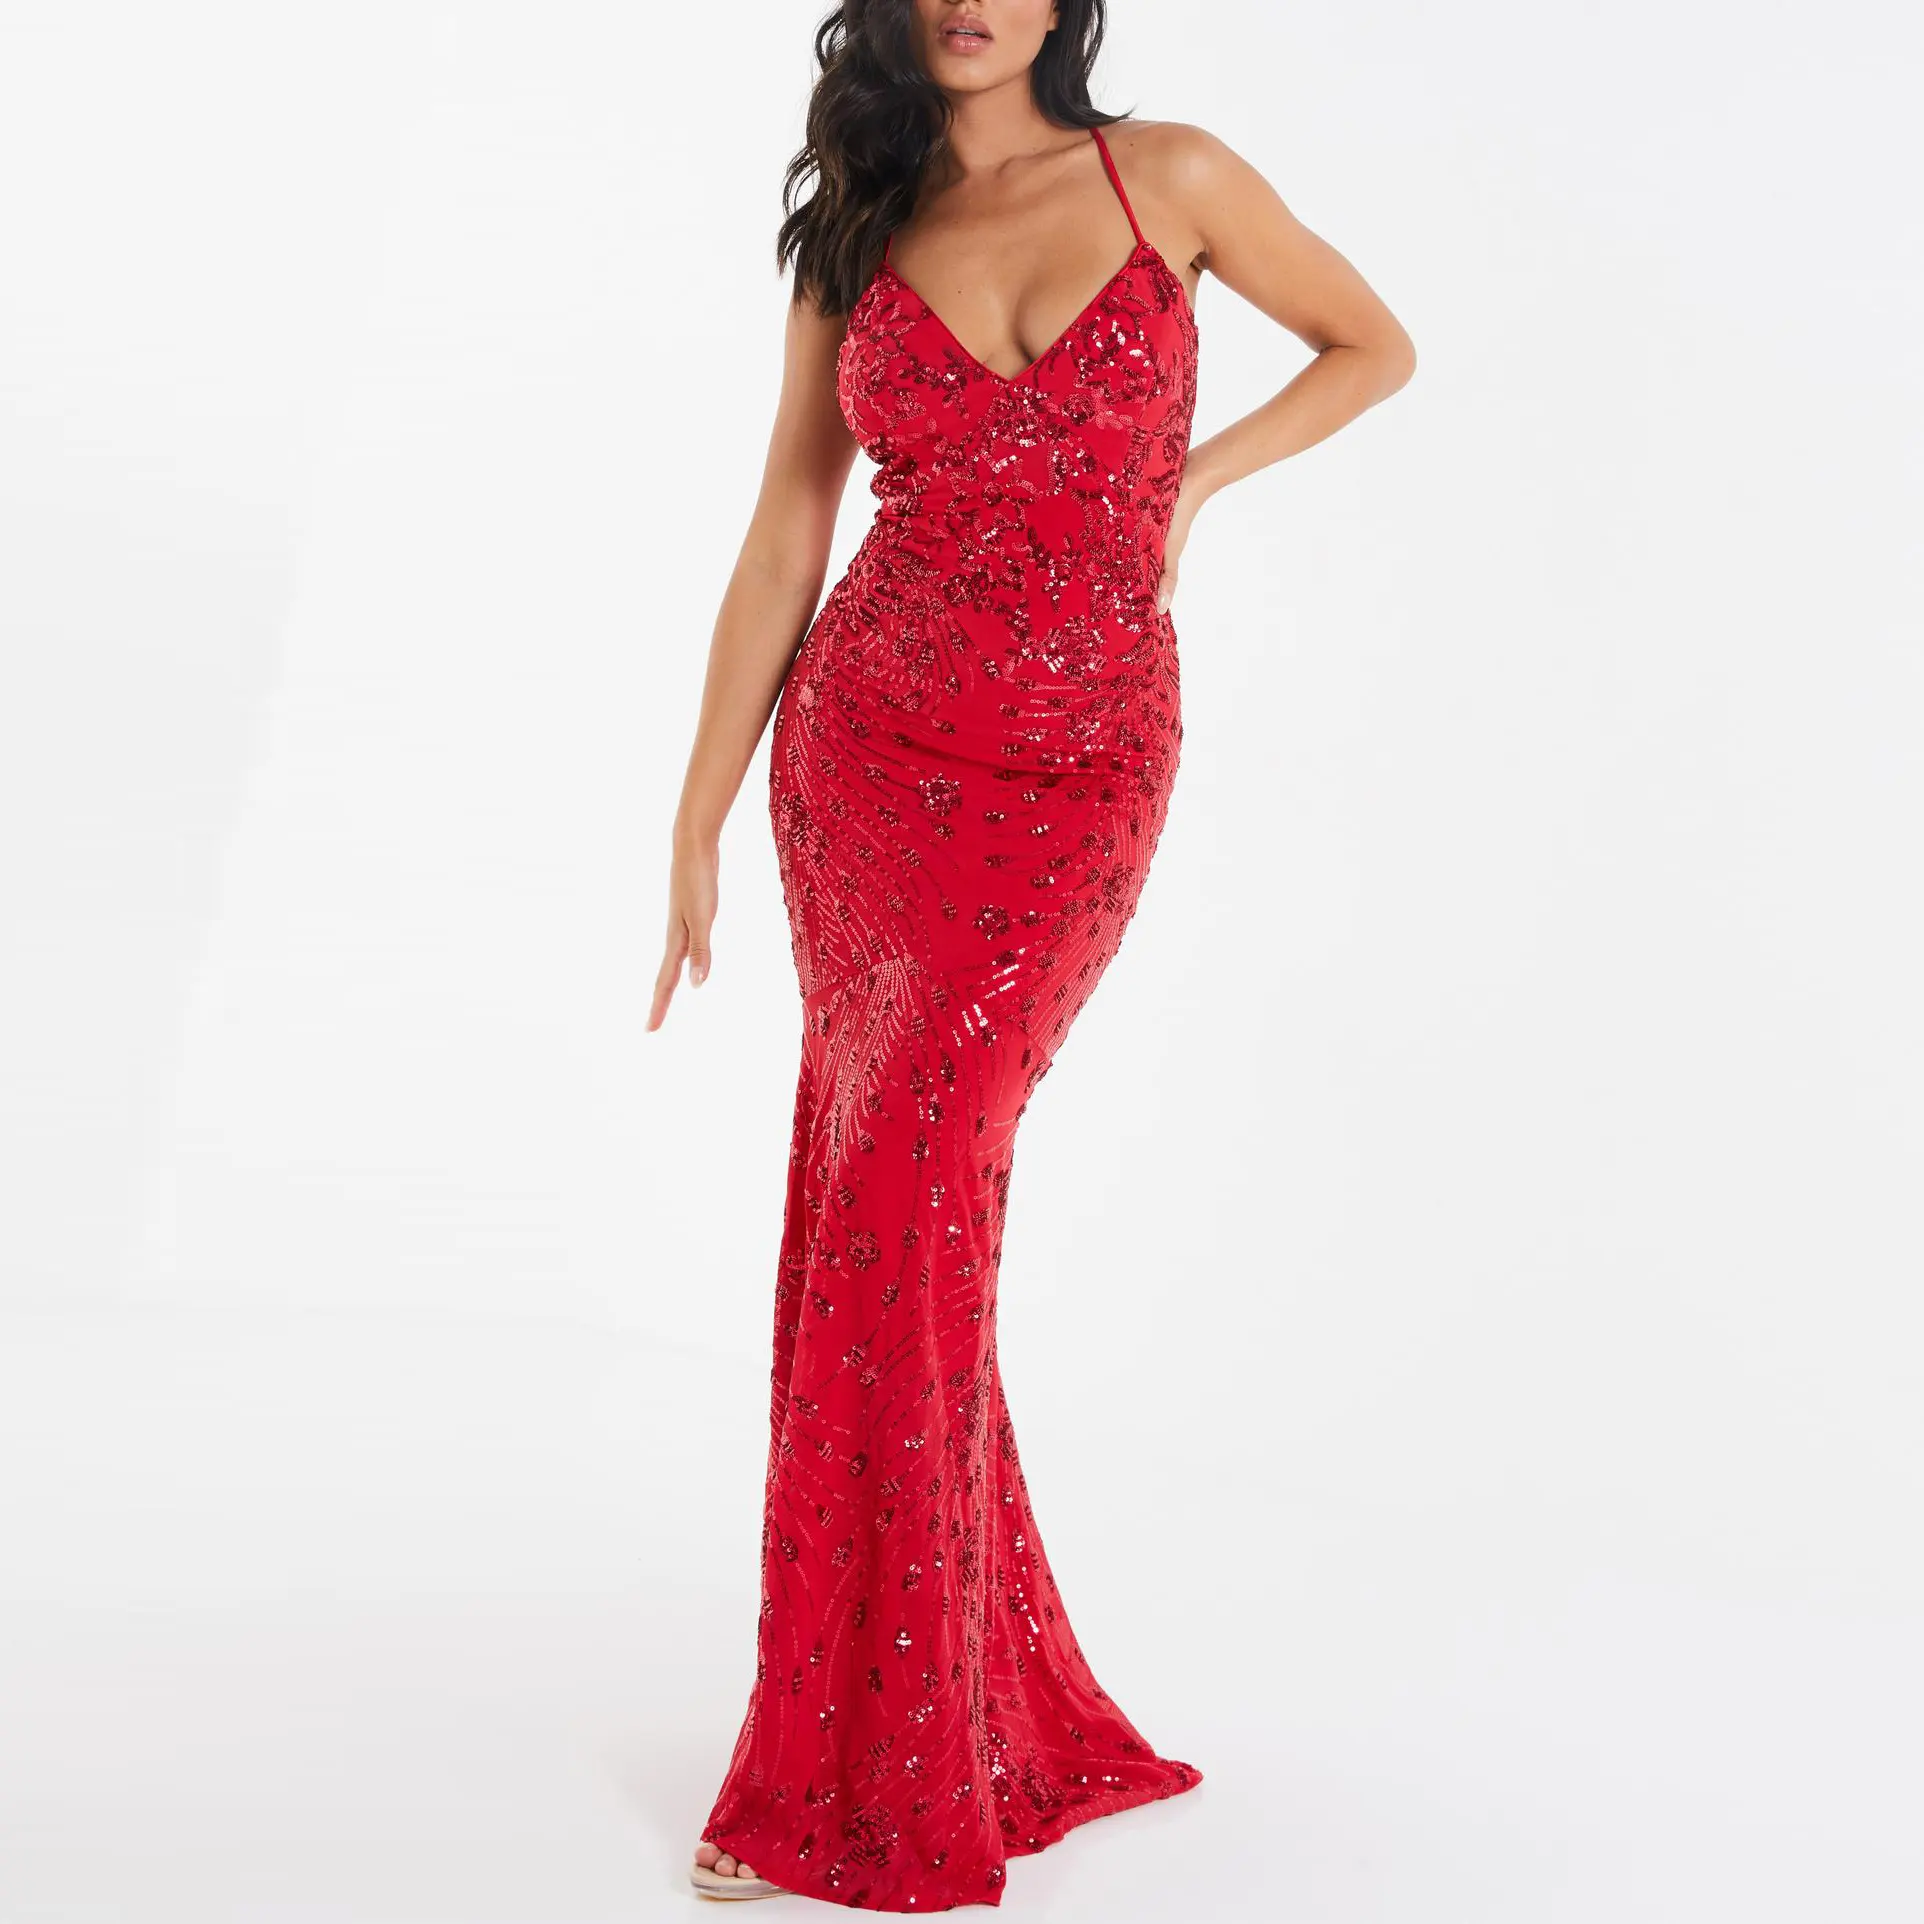 Custom 2022 Formal Gowns Sexy Evening Dresses Red Sequin Wedding Fishtail Maxi Dress